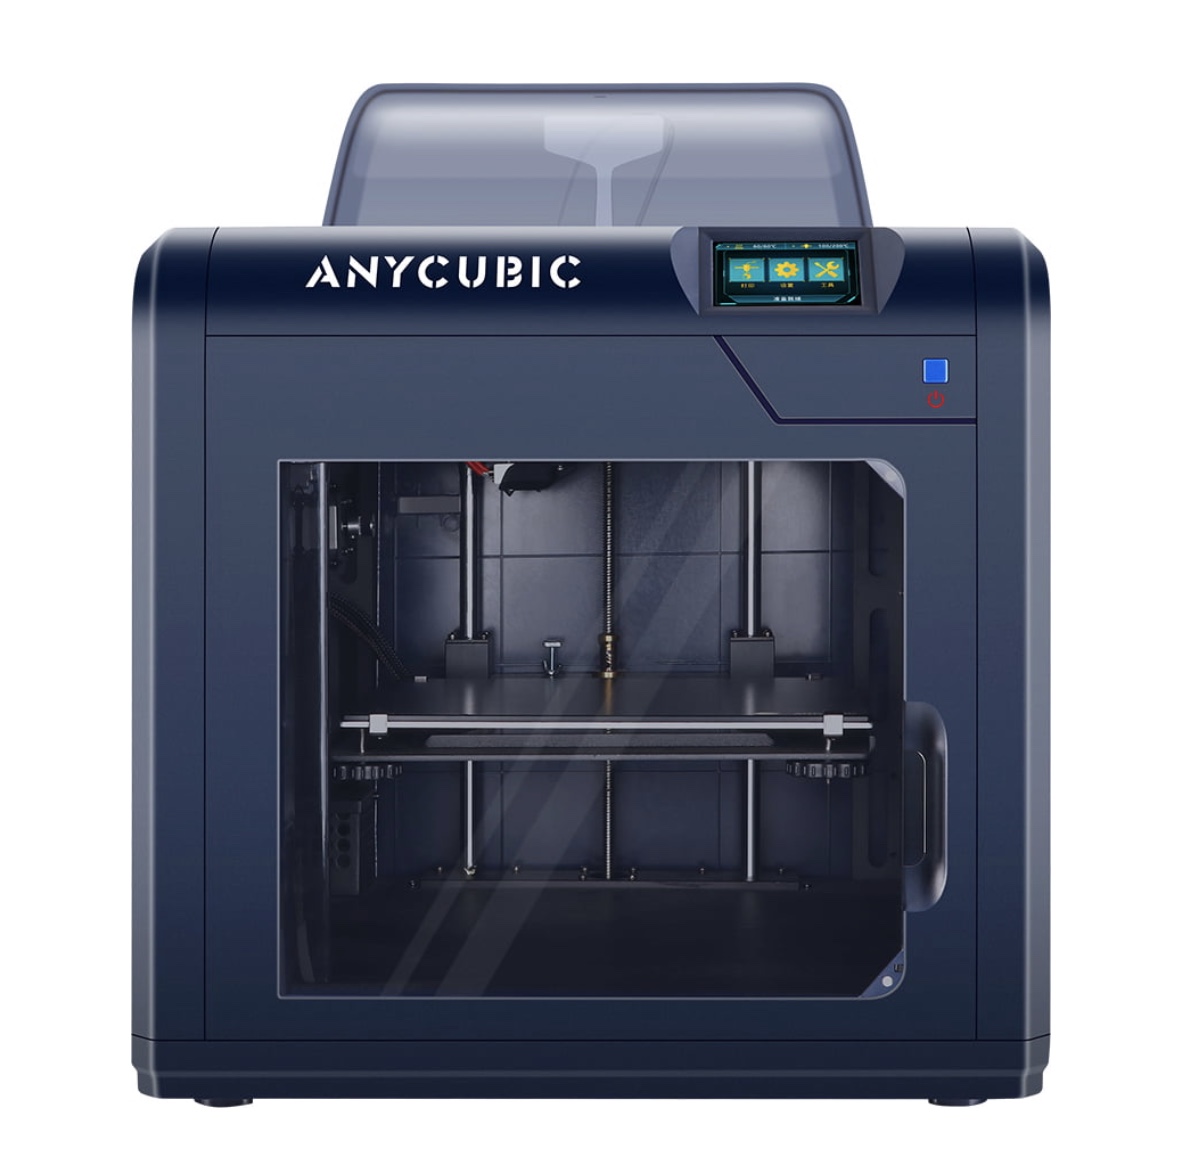 Beginner's Guide (English) · knutwurst/Marlin-2-0-x-Anycubic-i3-MEGA-S Wiki  · GitHub